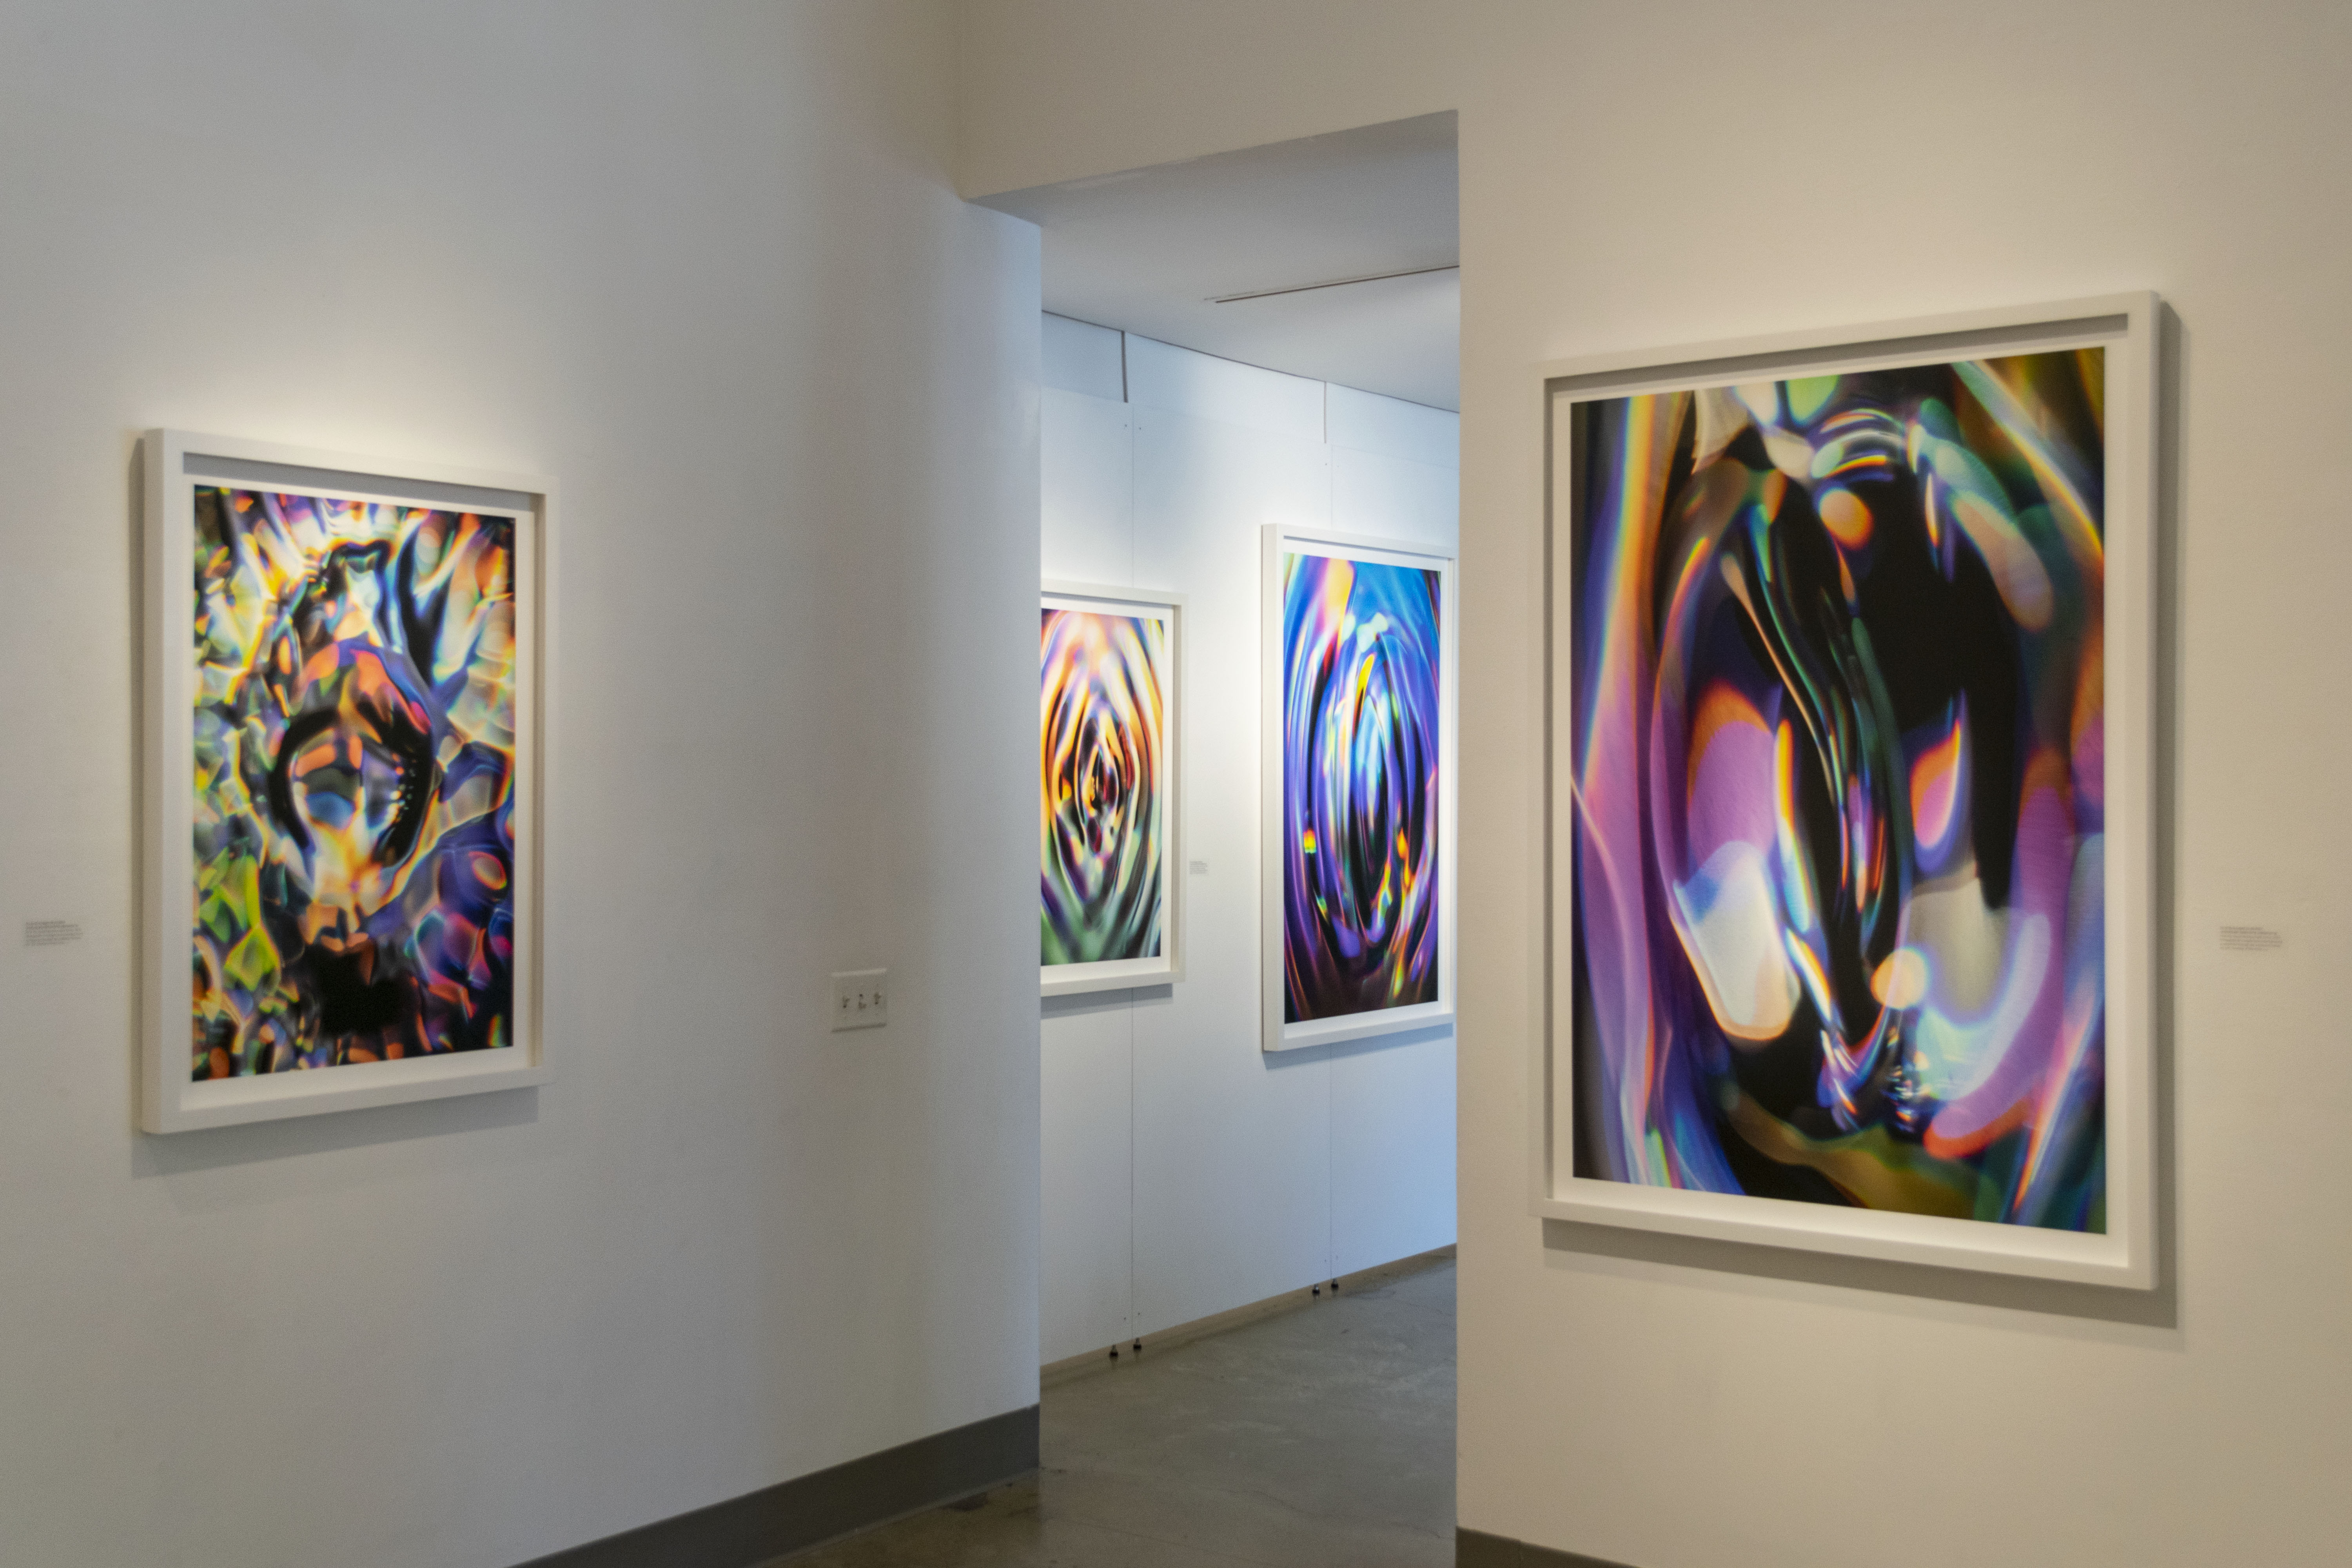 Eastside view of gallery, Exhibition: Sasha vom Dorp: 15.15 Hz, Aug. 23 - Oct. 18, 2018, Curator: Michele Cairella Fillmore, W. Keith & Janet Kellogg Art Gallery, Cal Poly Pomona. [Artist Sasha vom Dorp captures the interaction of light, sound and water in high-speed photography (Photo Credit: William W. Gunn)]